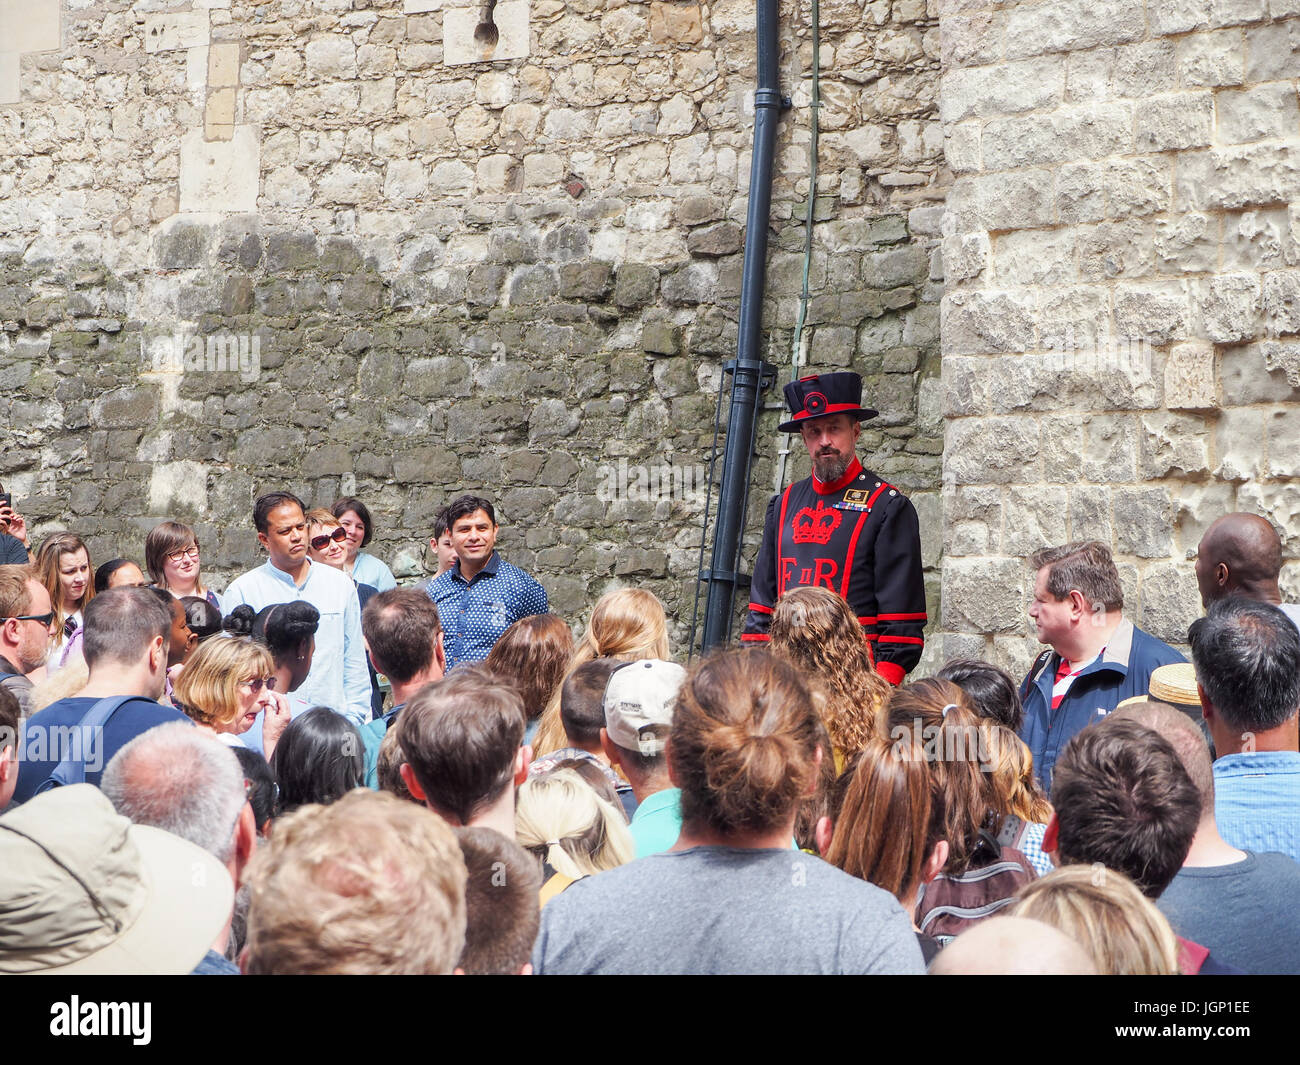 Yeomen Warders, known as Beefeaters, Tower of London, London City, United Kingdom Stock Photo